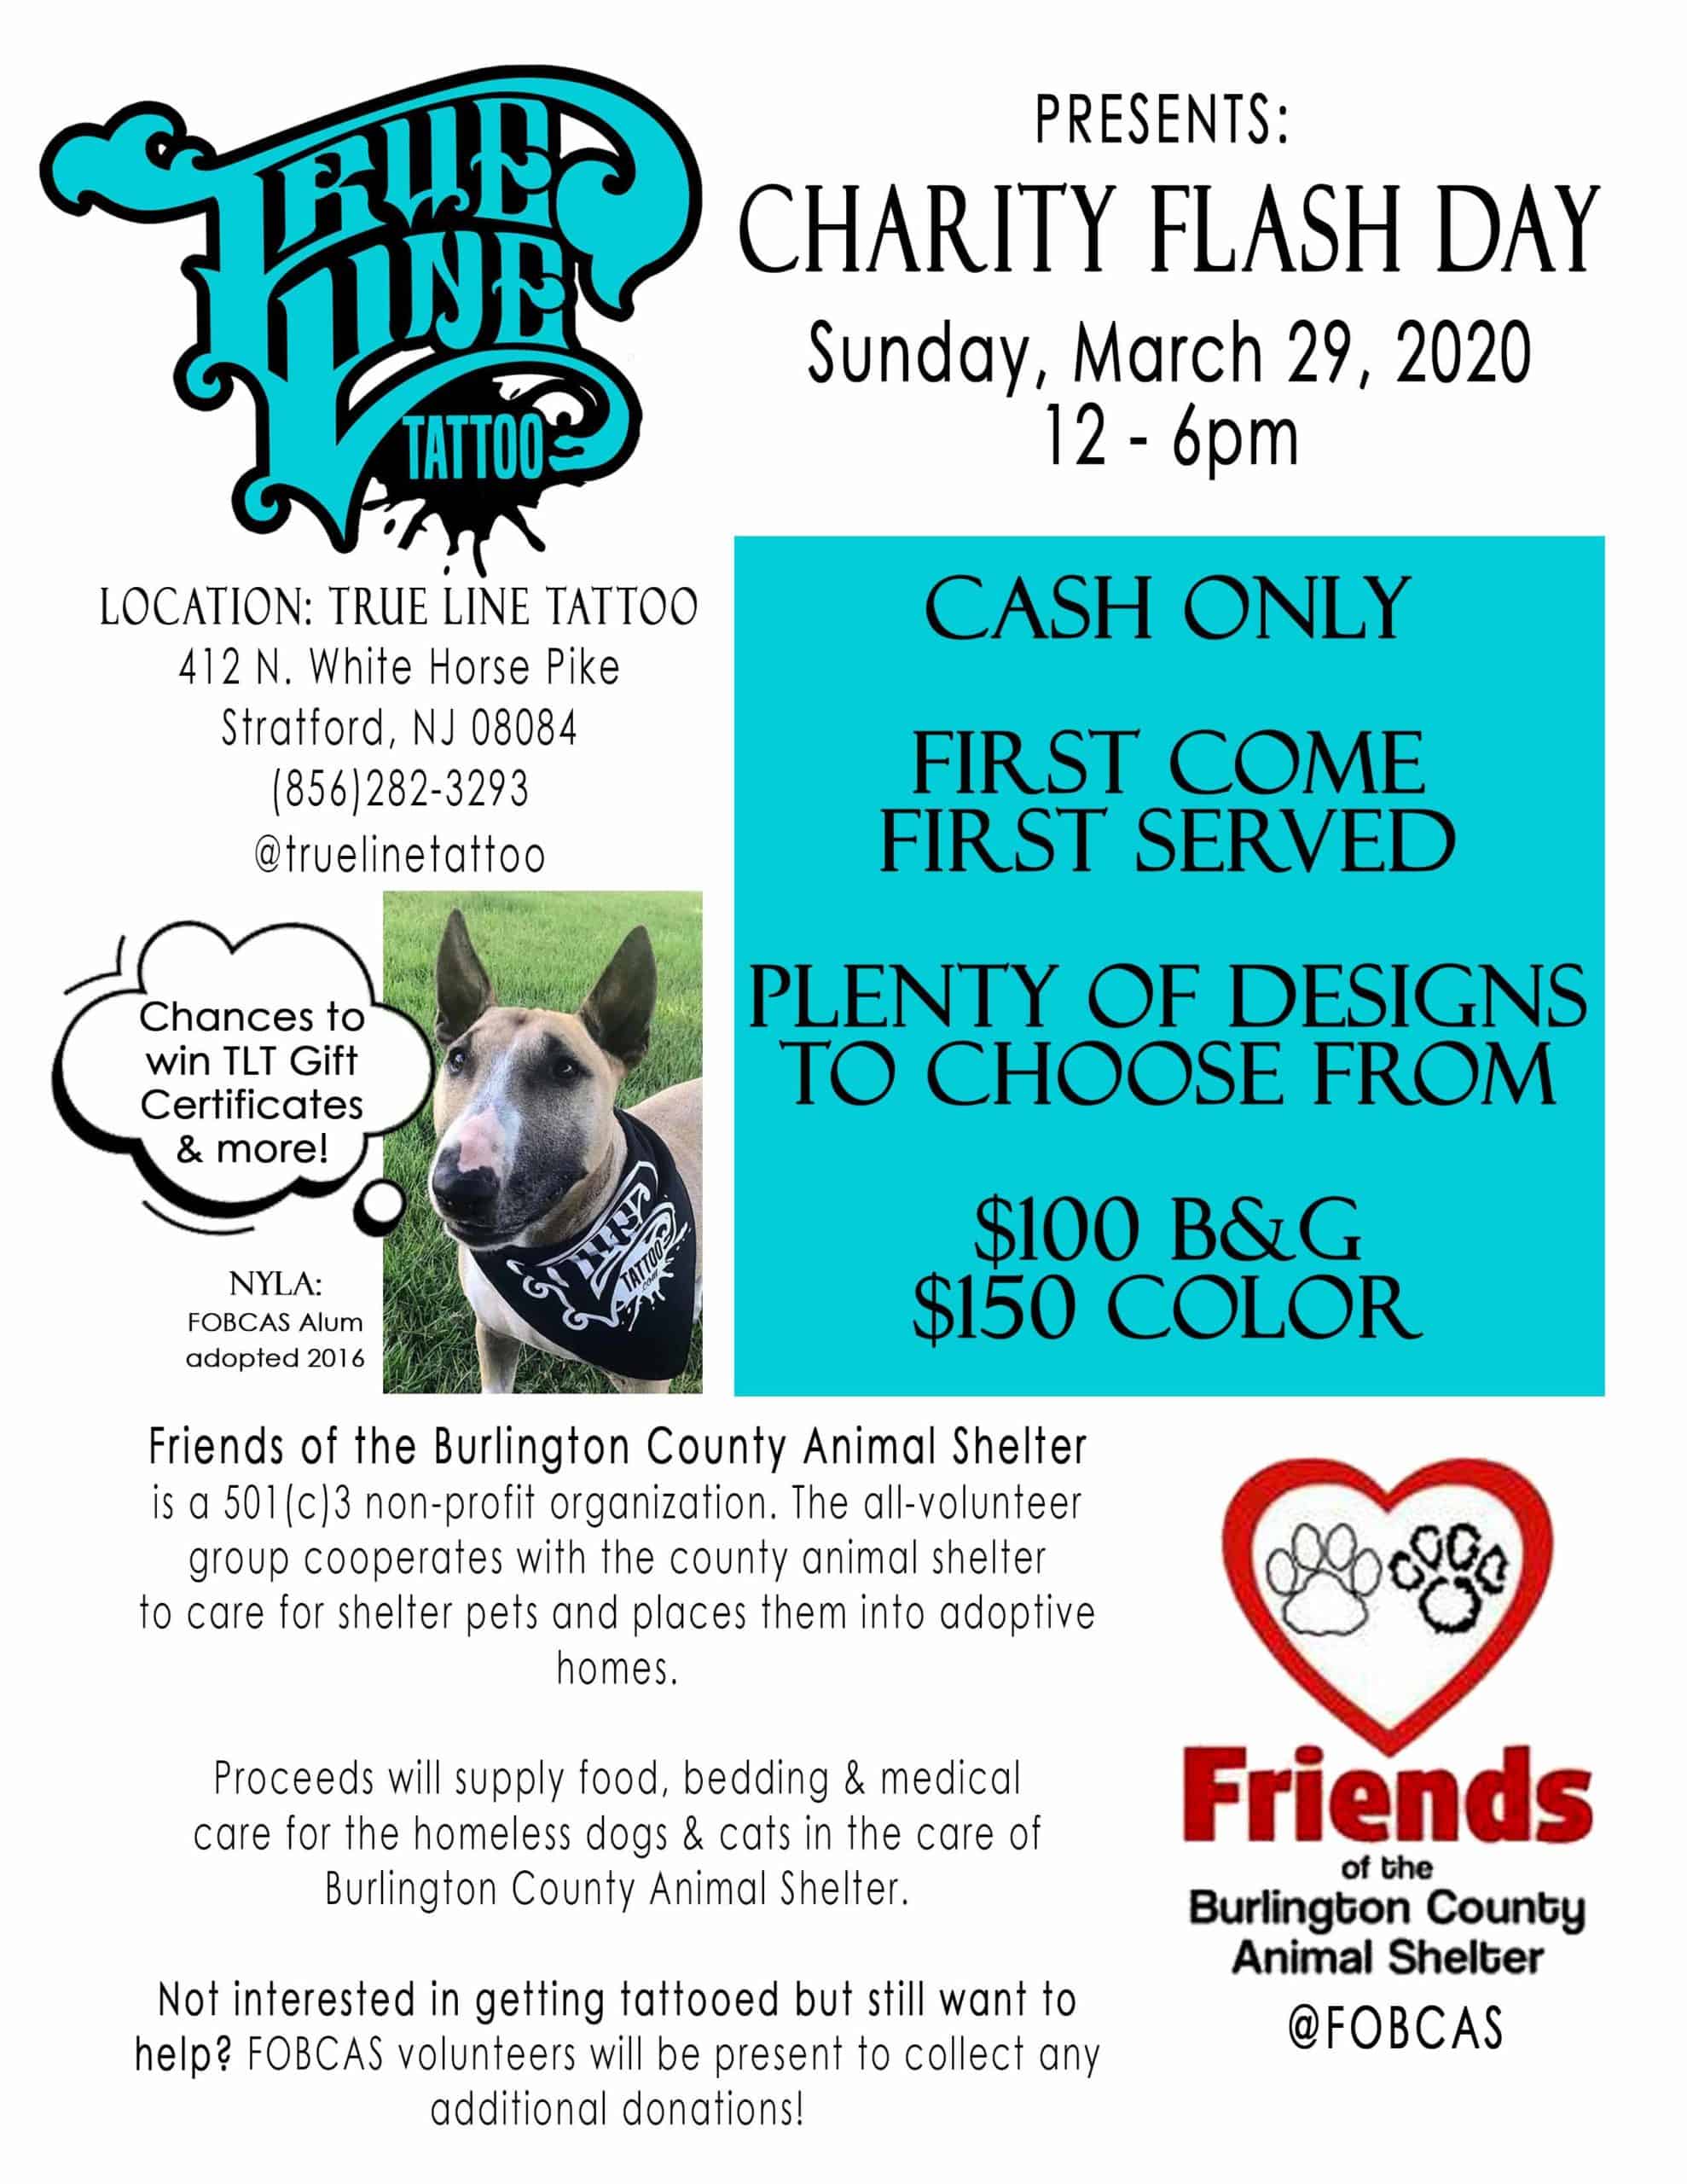 Get inked on March 29 and help homeless animals – Friends of the Burlington  County Animal Shelter